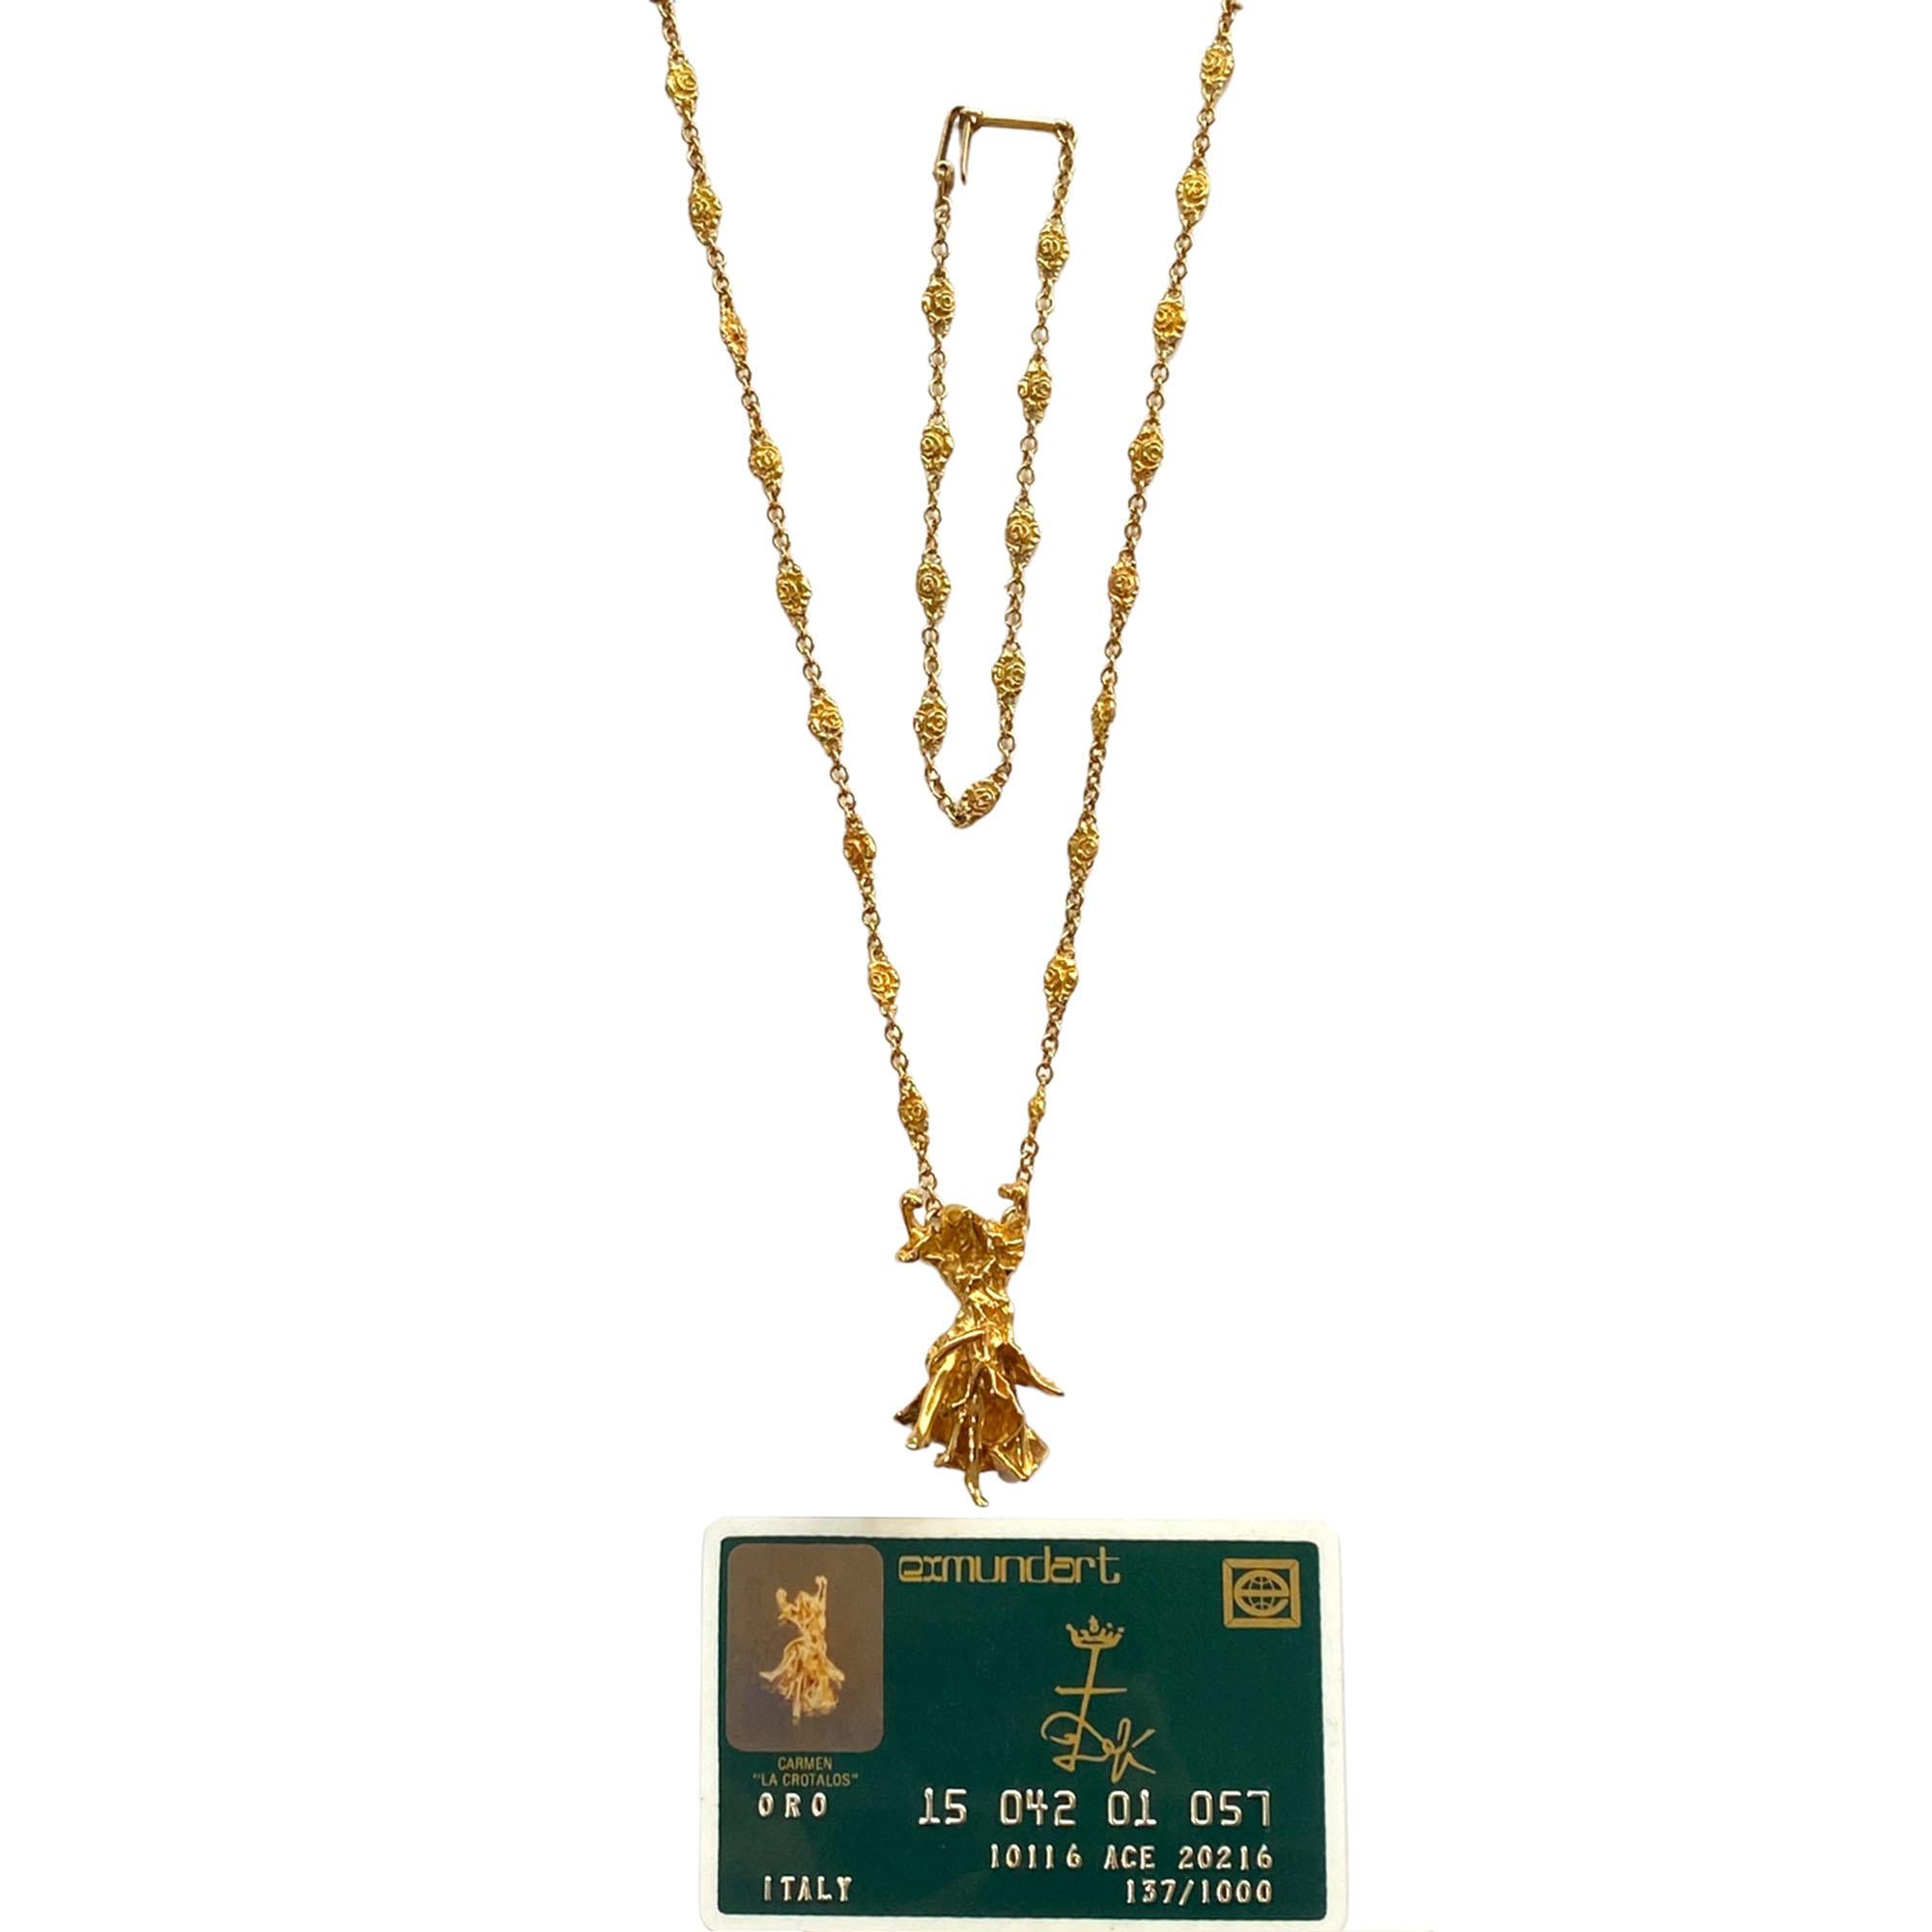 Limited Edition 18k Yellow Gold Salvador Dali Carmen La Crotalos Necklace Bracelet Set.
We ship with his certification card.
Necklace and bracelet are matching. you can use the bracelet to lengthen the necklace from 42cm to 63cm total 
Yellow gold